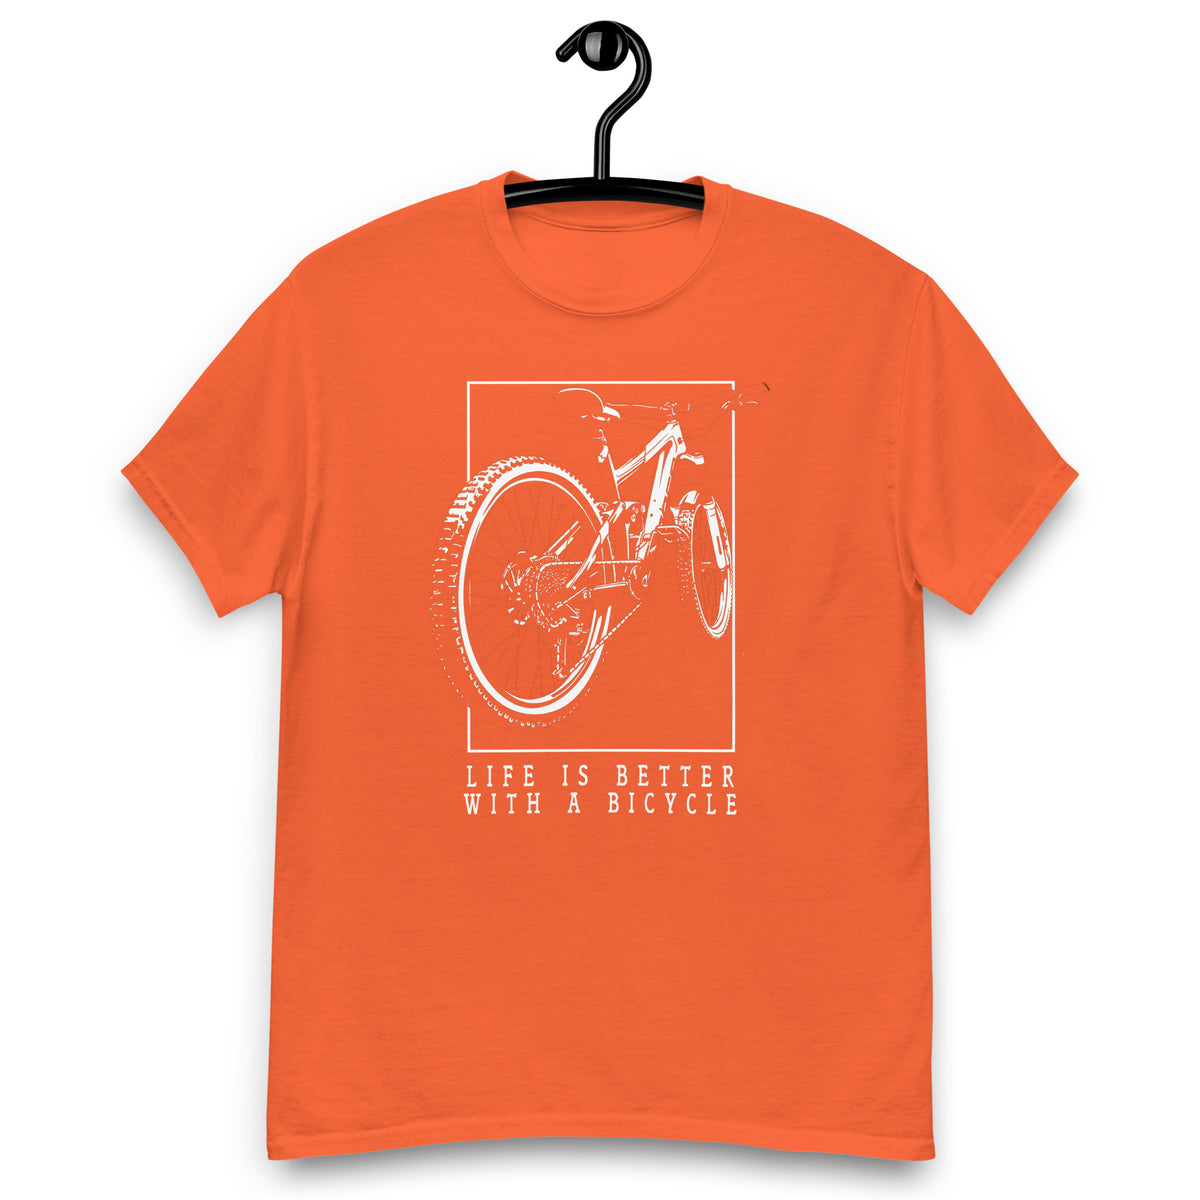 Fahrrad Shirts " Life is better wihe Bicycle "